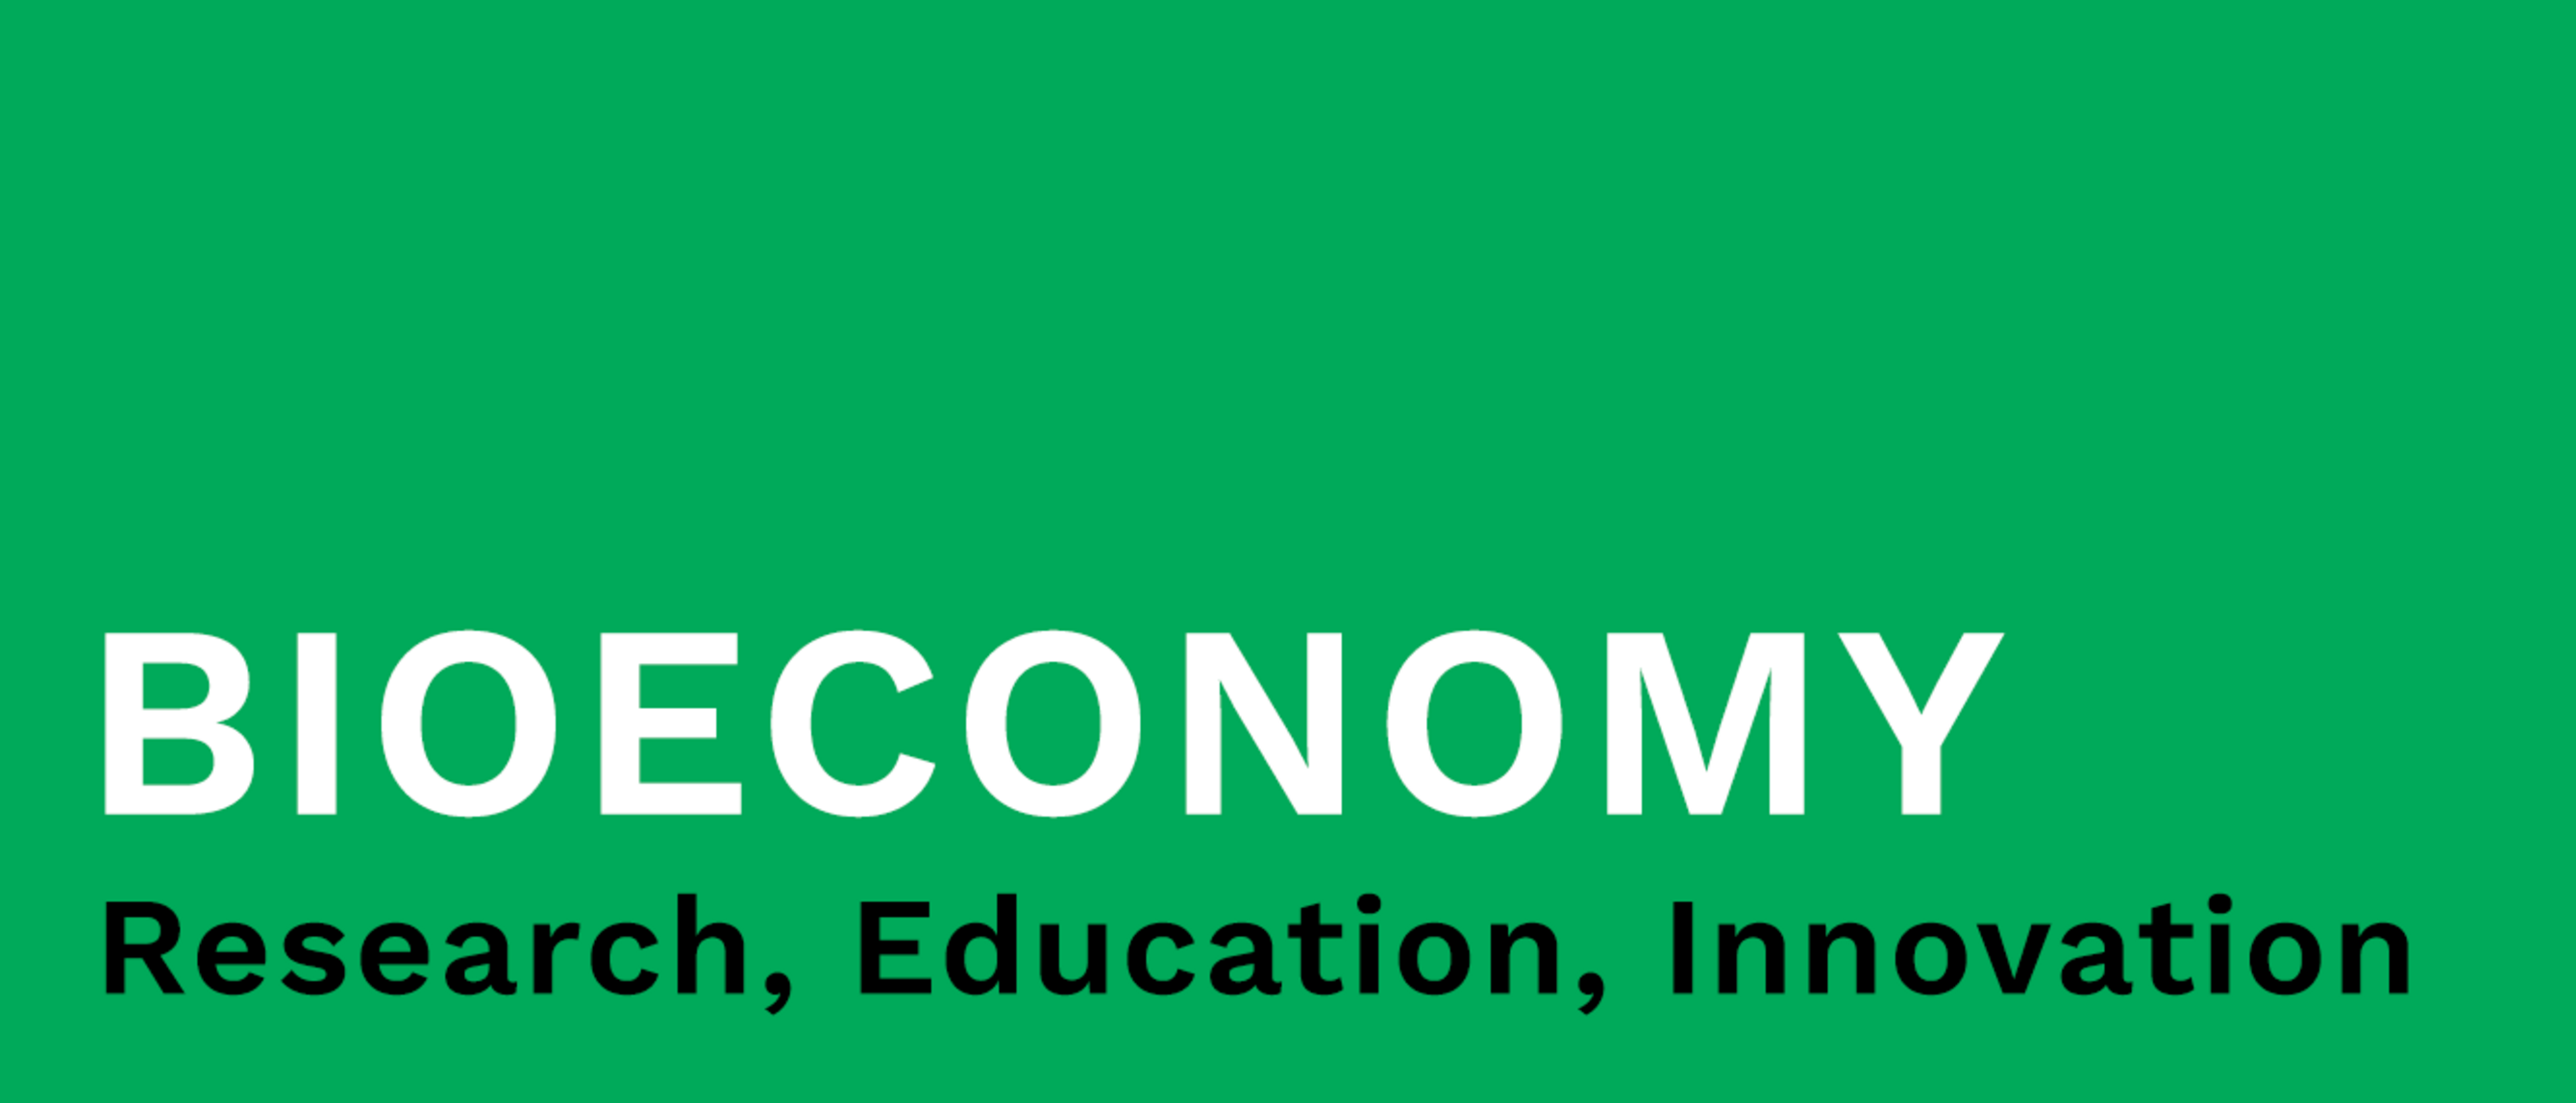 text in image: bioeconomy - research, education, innovation